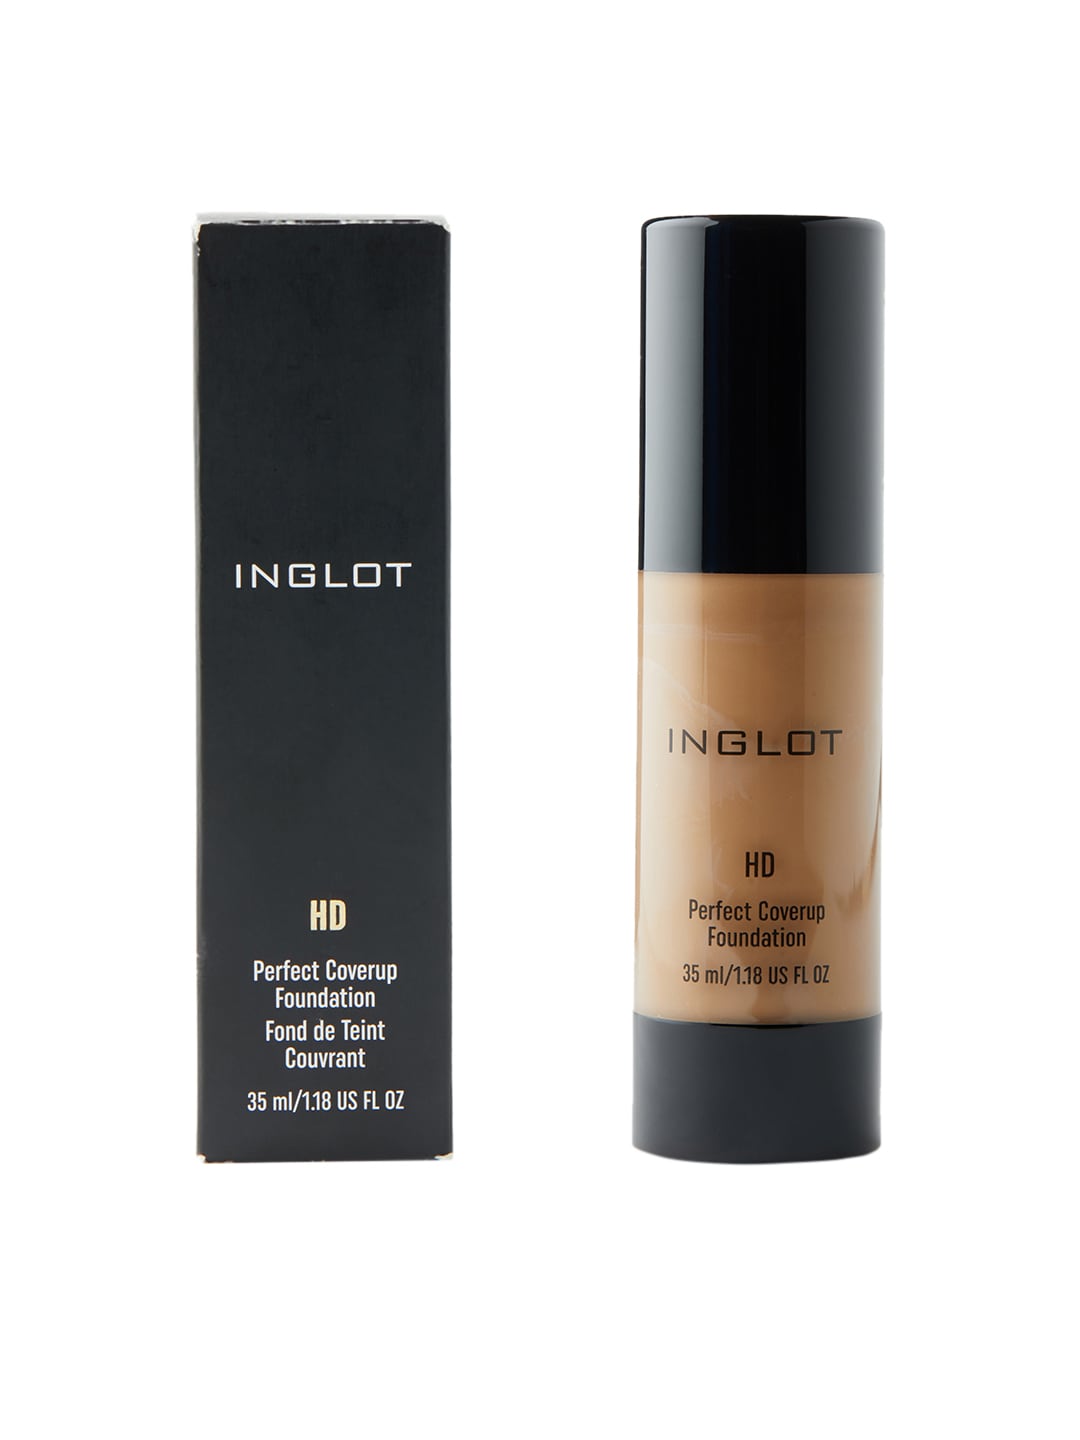 INGLOT HD Perfect Coverup Foundation 75, (35ml) Price in India